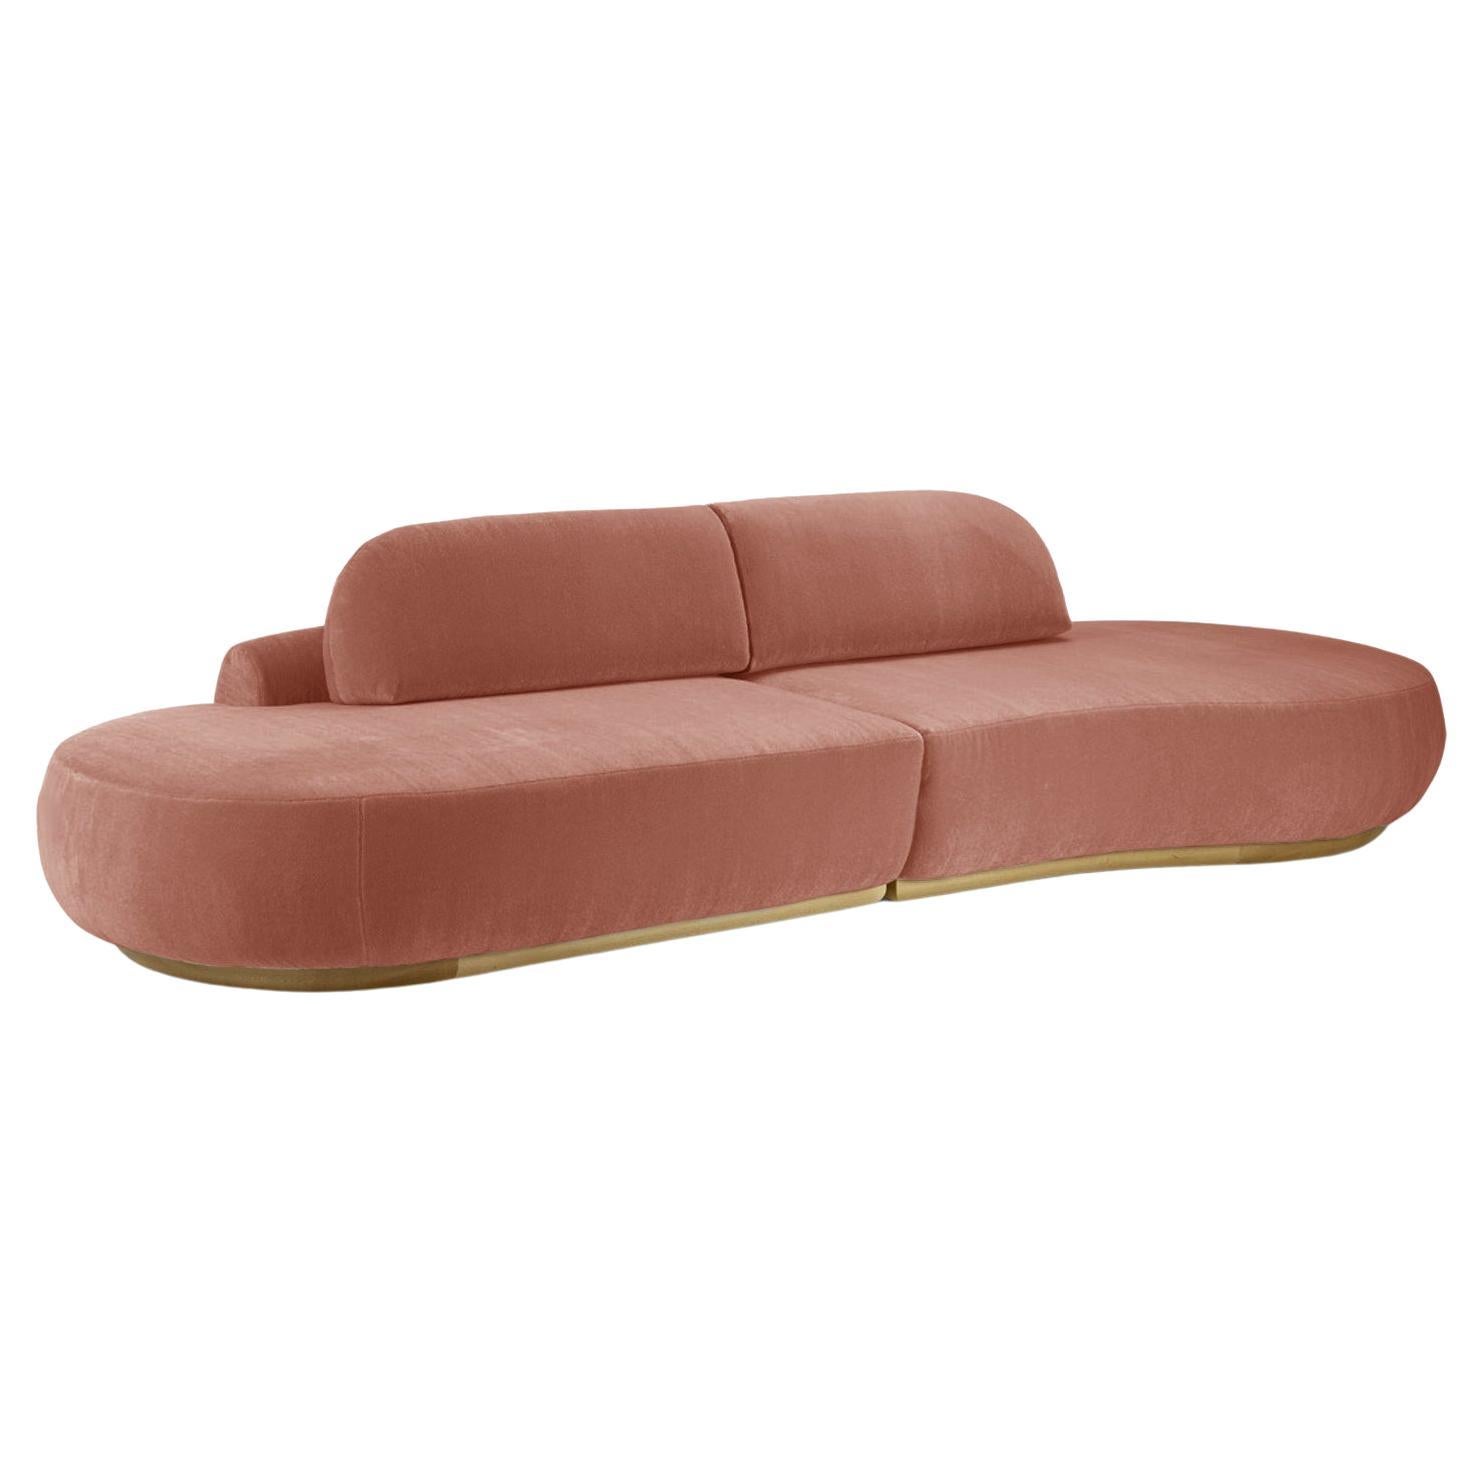 Naked Curved Sectional Sofa, 2 Piece with Natural Oak and Paris Brick For Sale